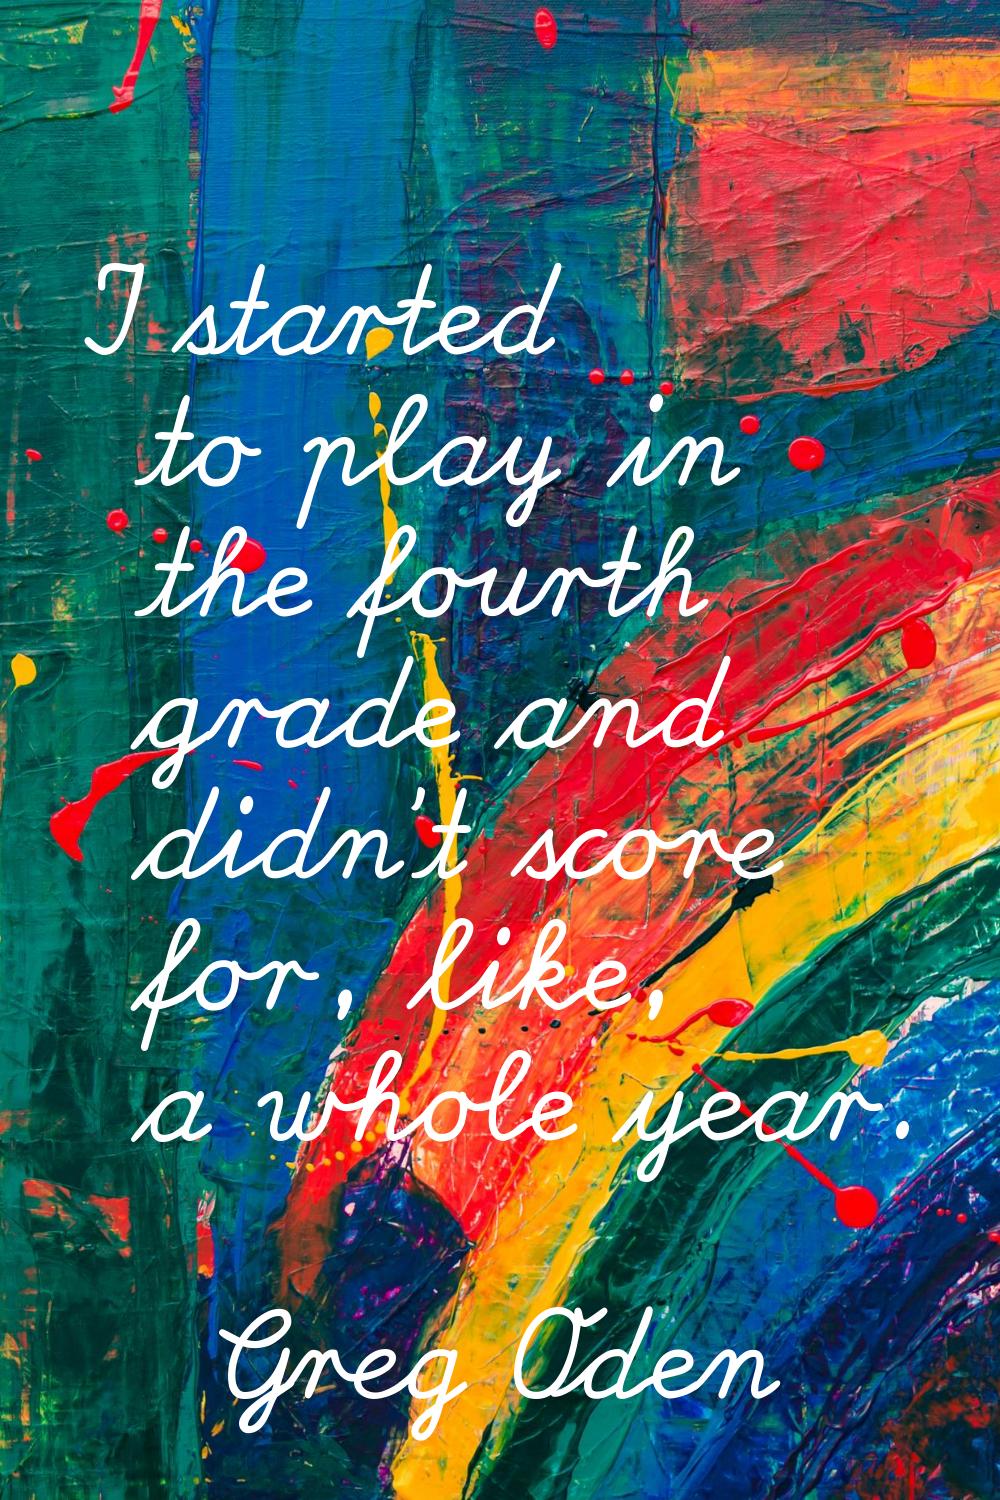 I started to play in the fourth grade and didn't score for, like, a whole year.